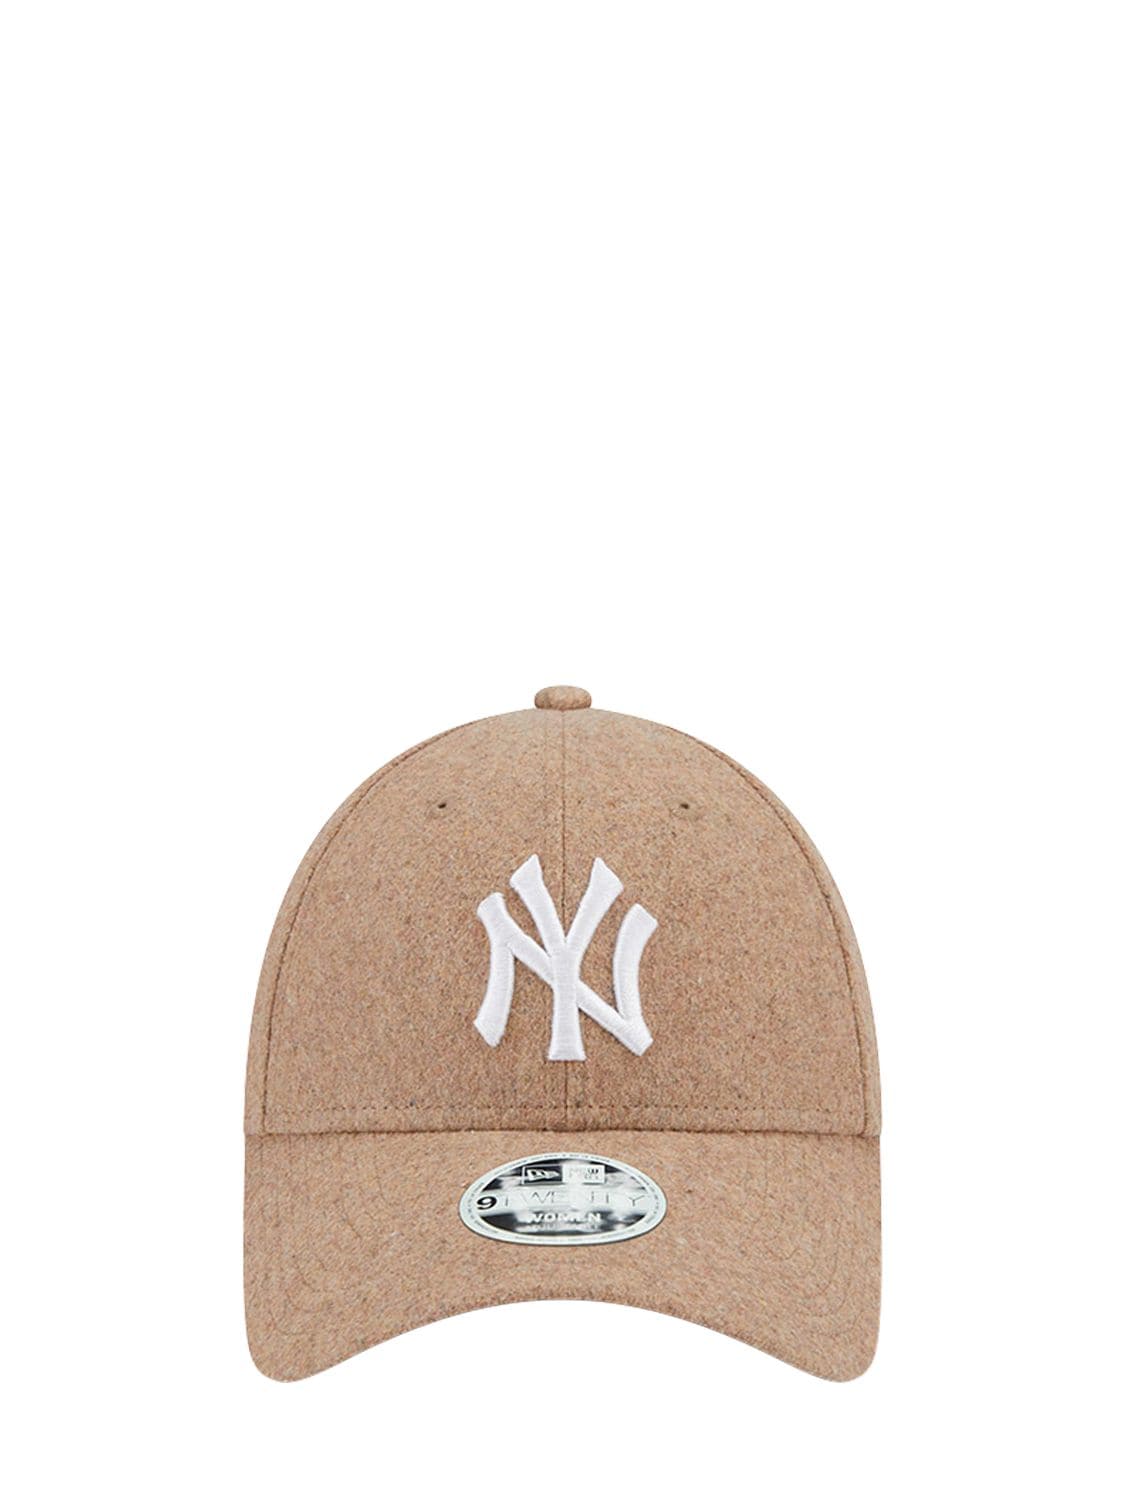 Wool 9forty New York Yankees Cap – WOMEN > ACCESSORIES > HATS